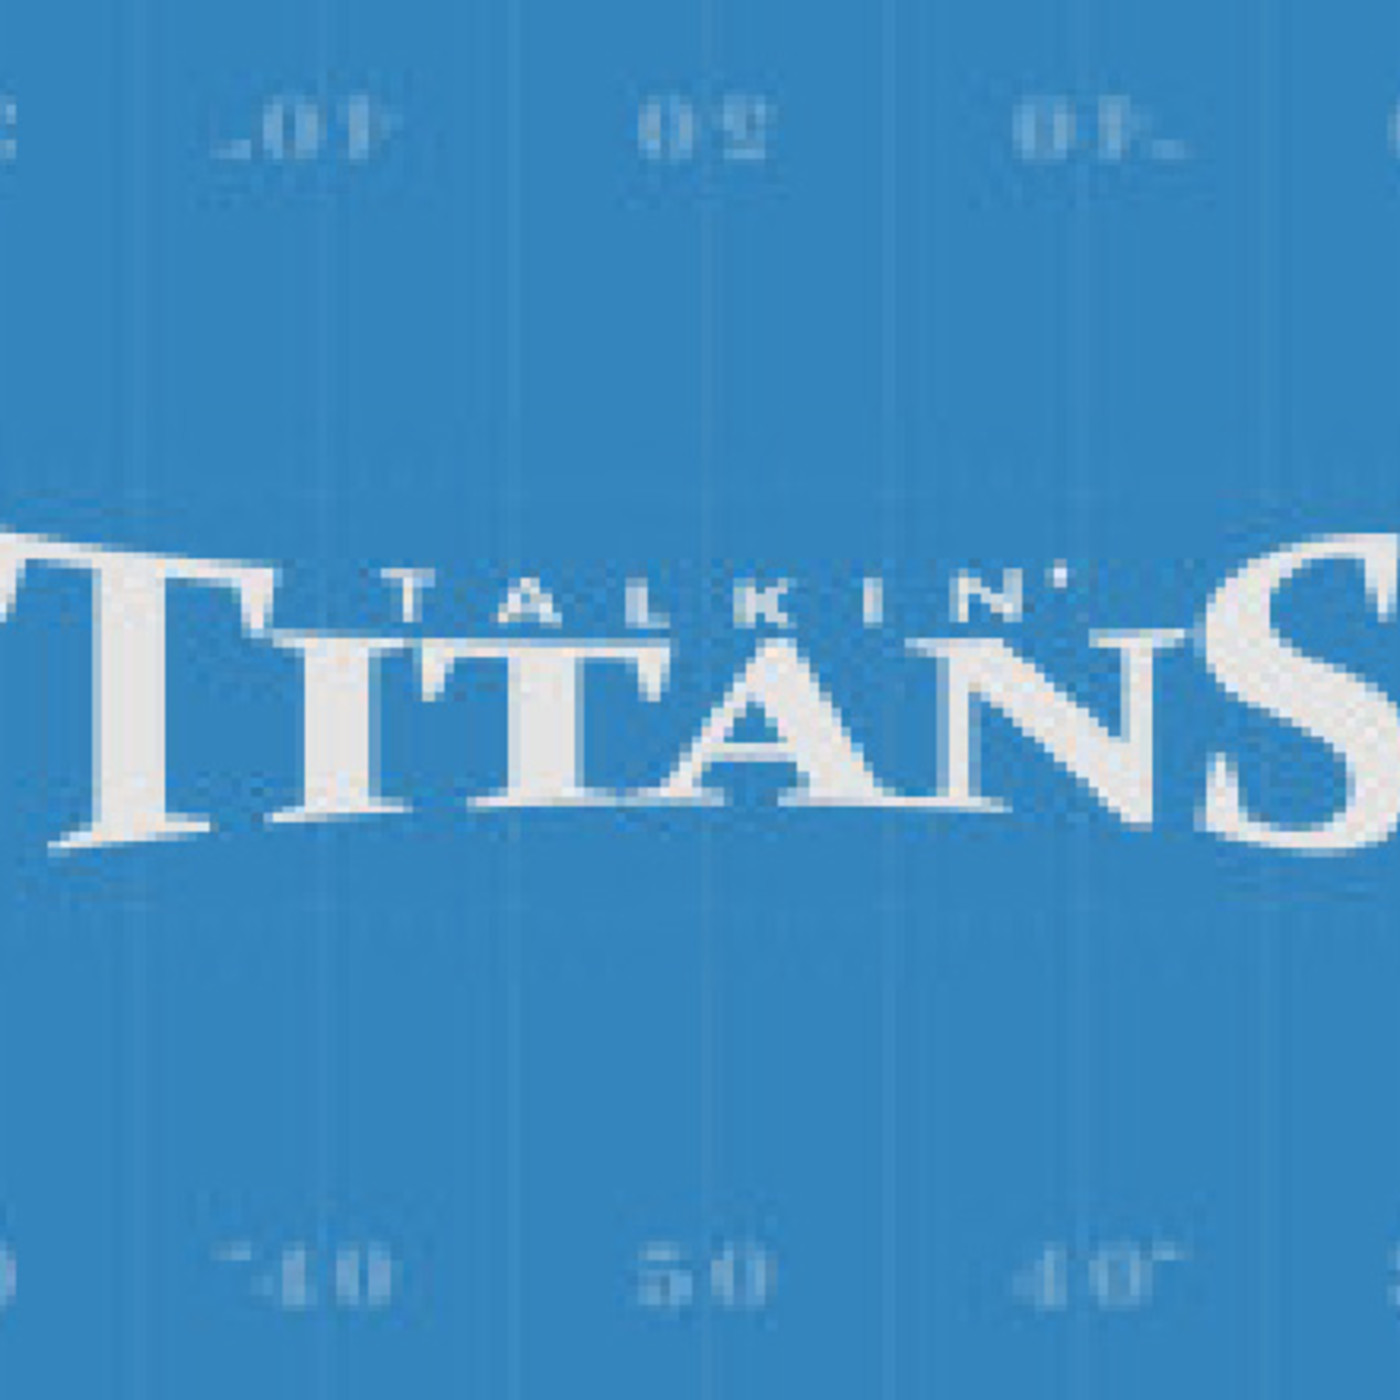 What should we be concerned about after Titans' Week 1 loss?